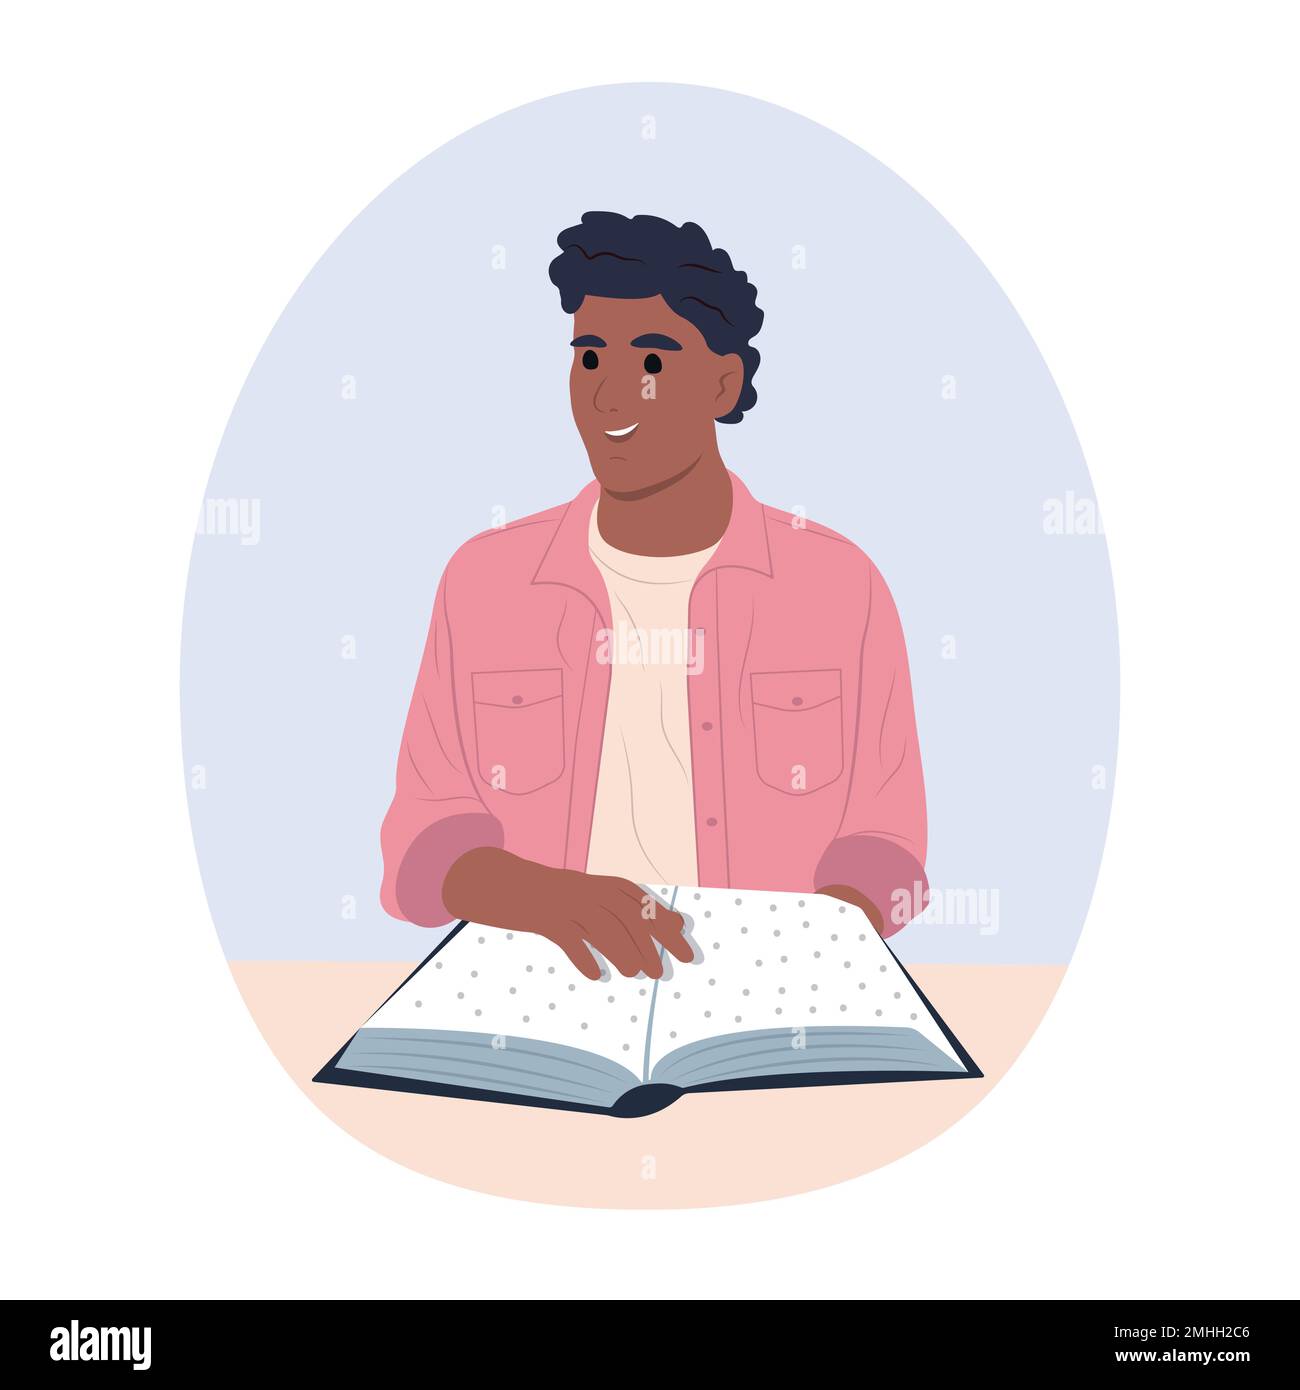 National Reading Day in America. We read together. A young smiling African American man is holding and reading a very interesting book. Stock Vector